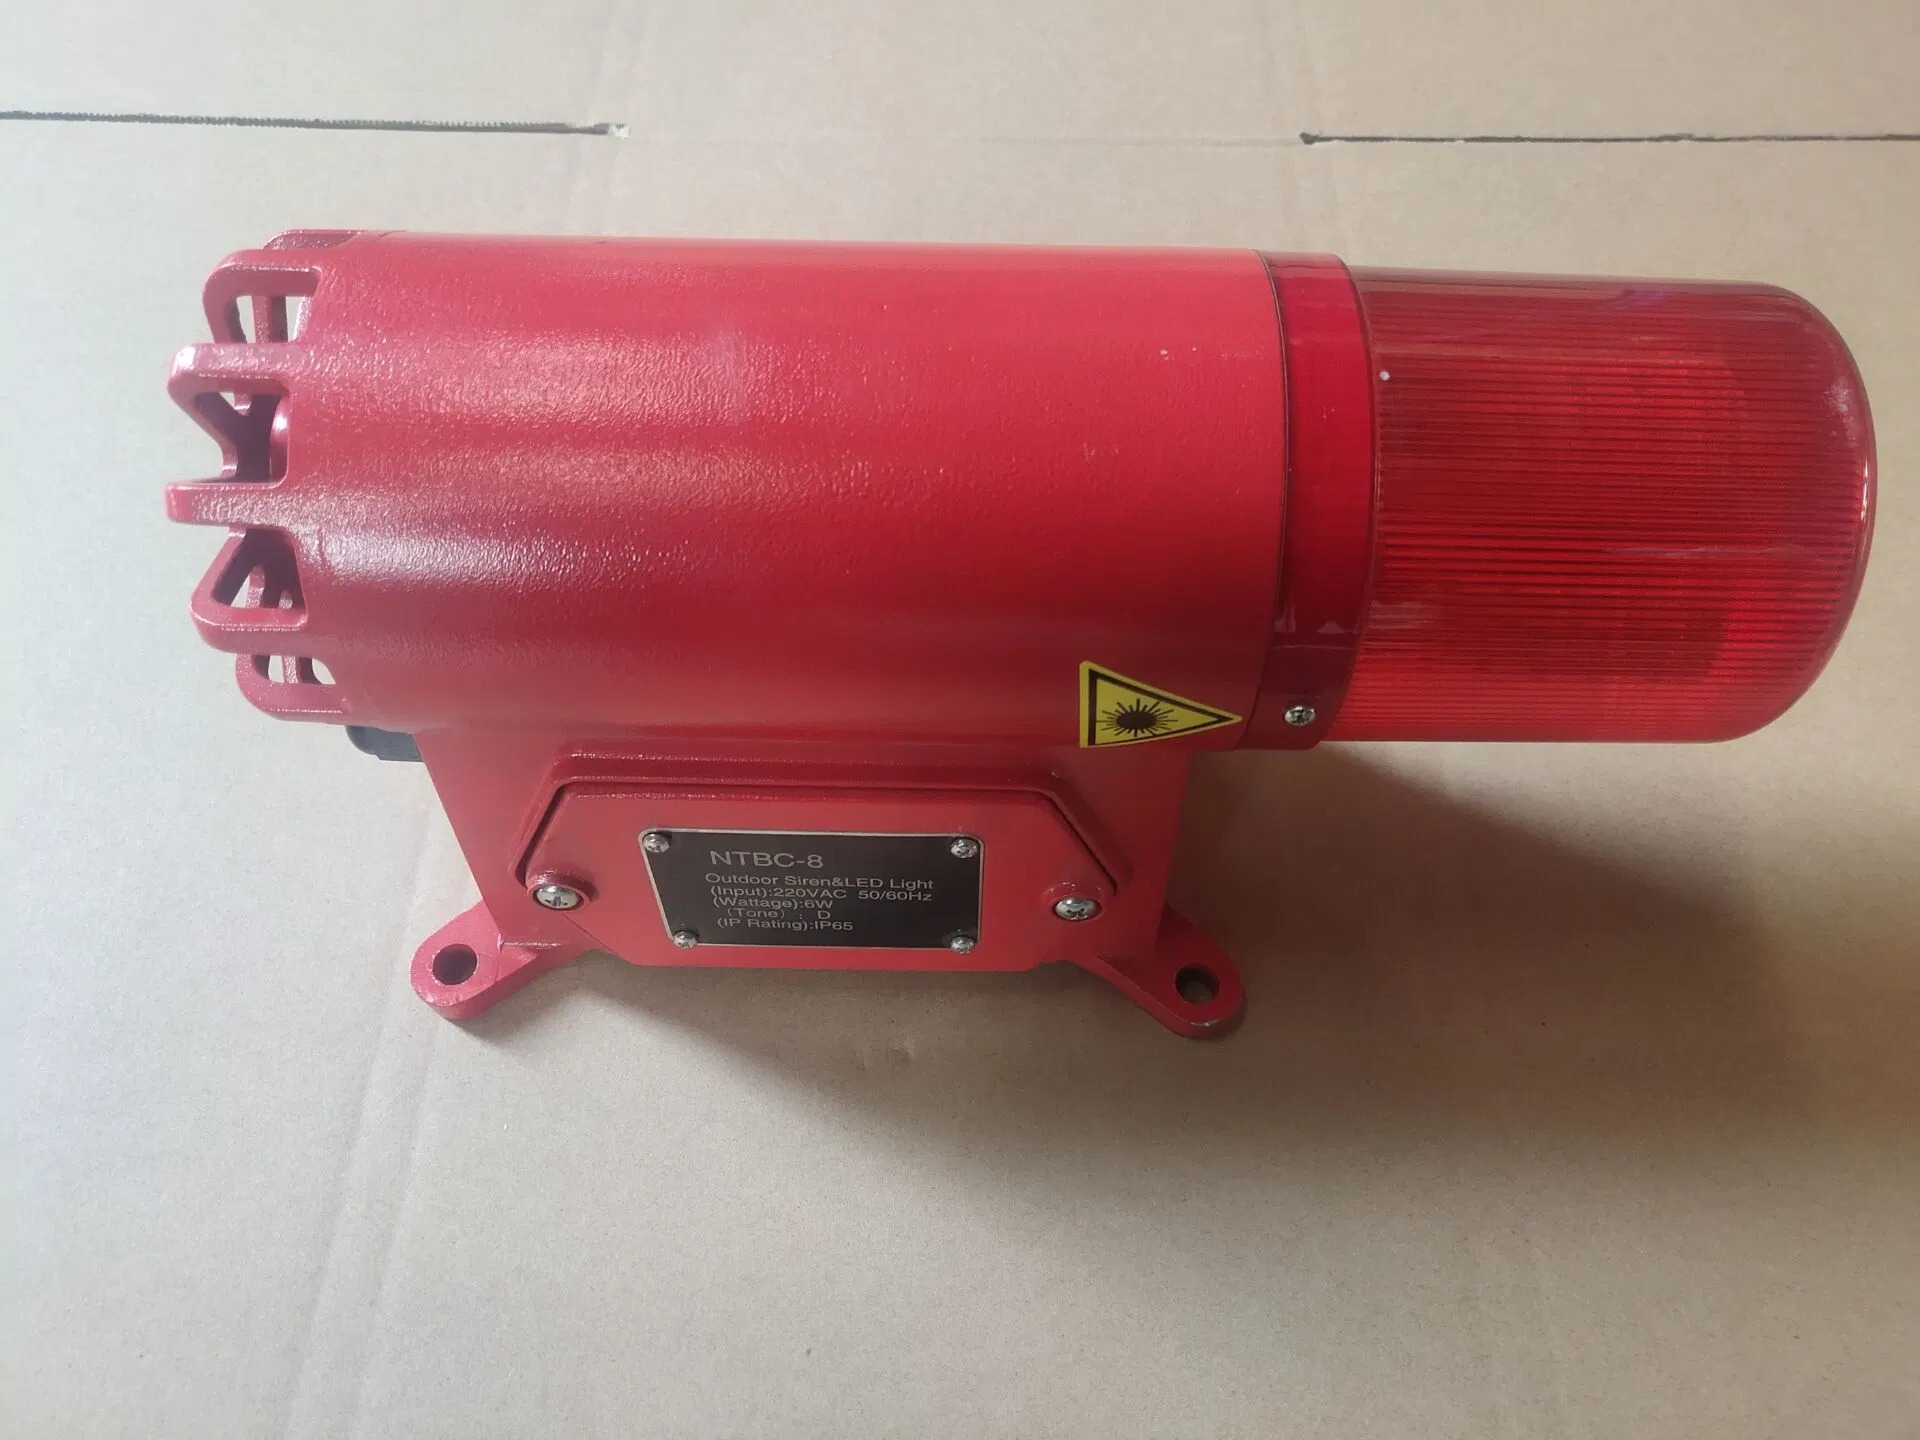 Serviceable Ntb Series Crane Alarm Made in China